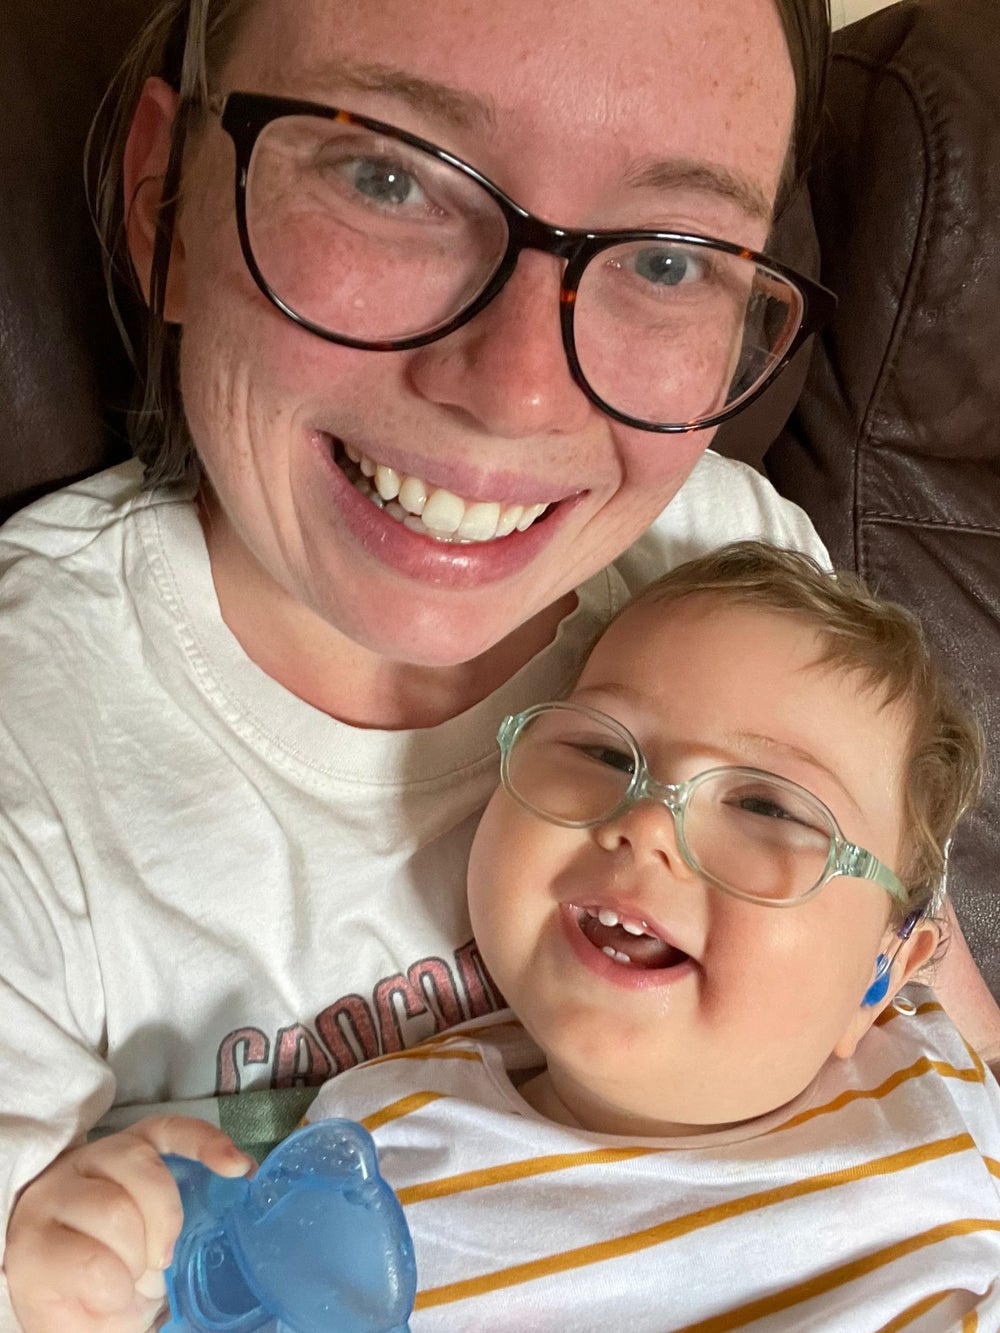 Libby Francis, 29, with her son, Zack Reilly (Collect/PA Real Life)